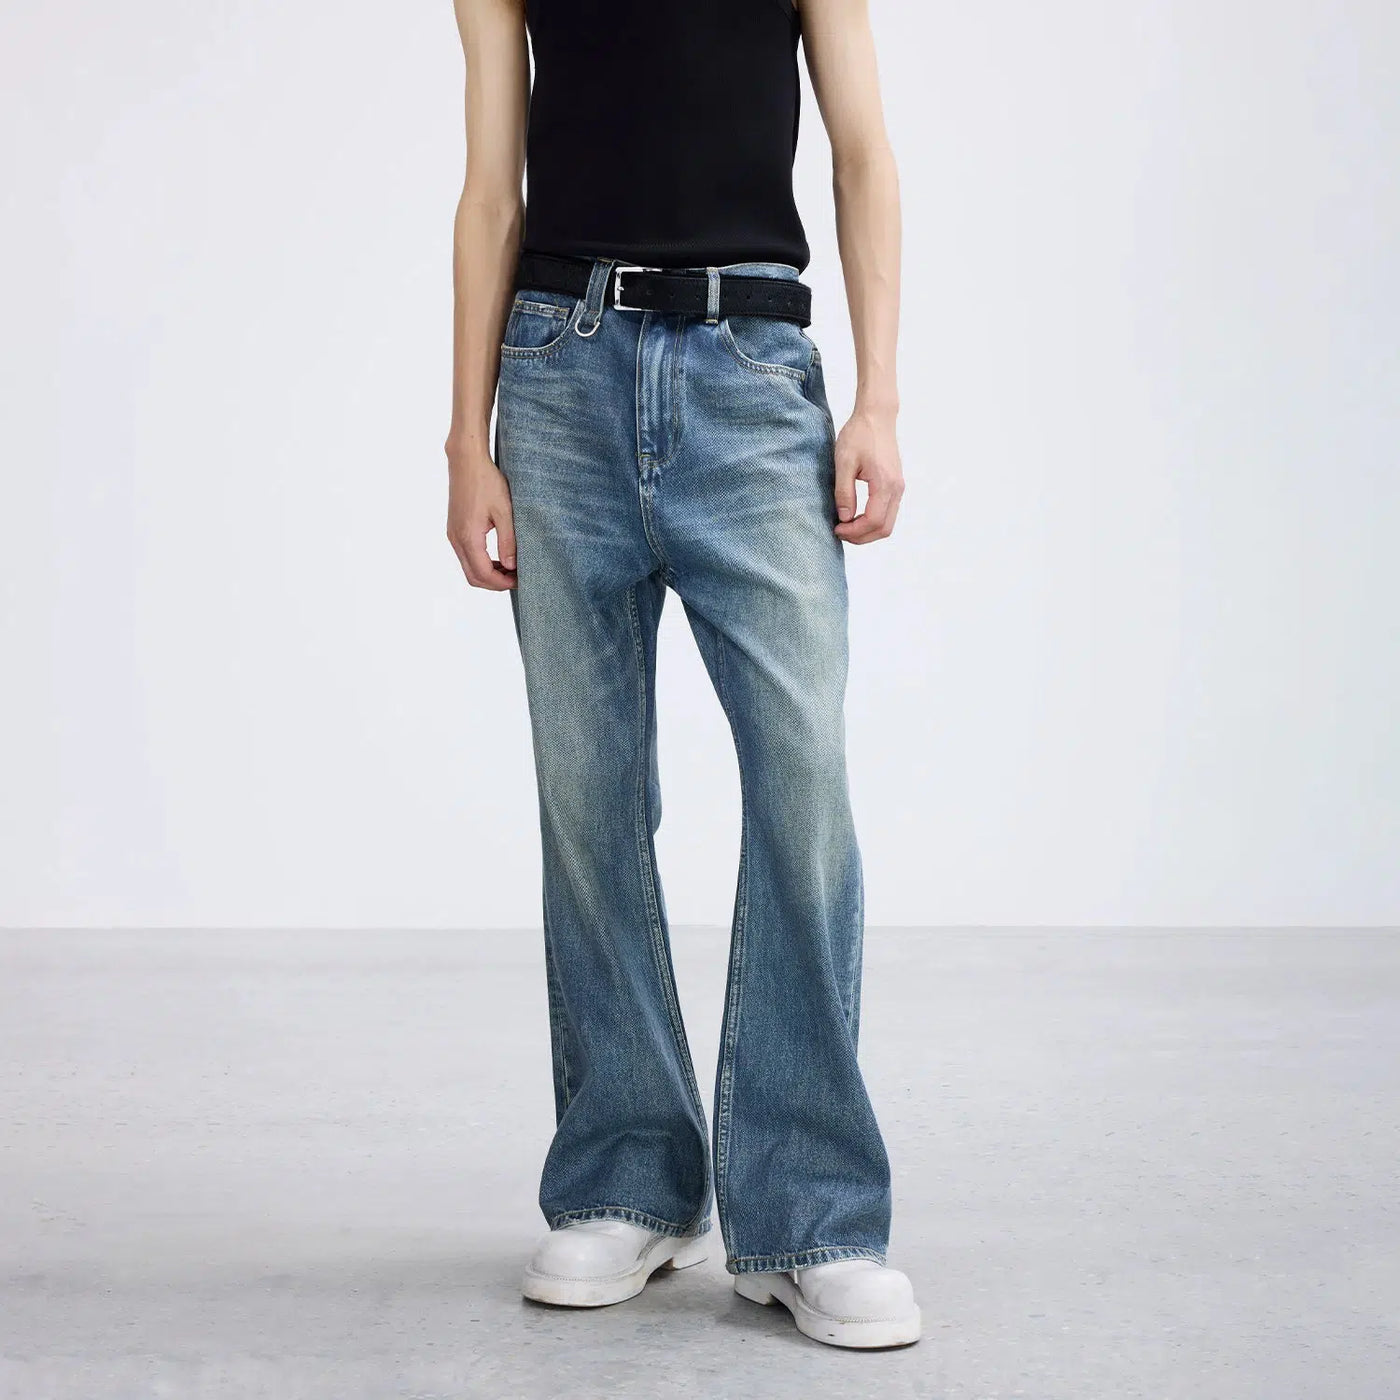 Faded Regular Bootcut Jeans Korean Street Fashion Jeans By Terra Incognita Shop Online at OH Vault